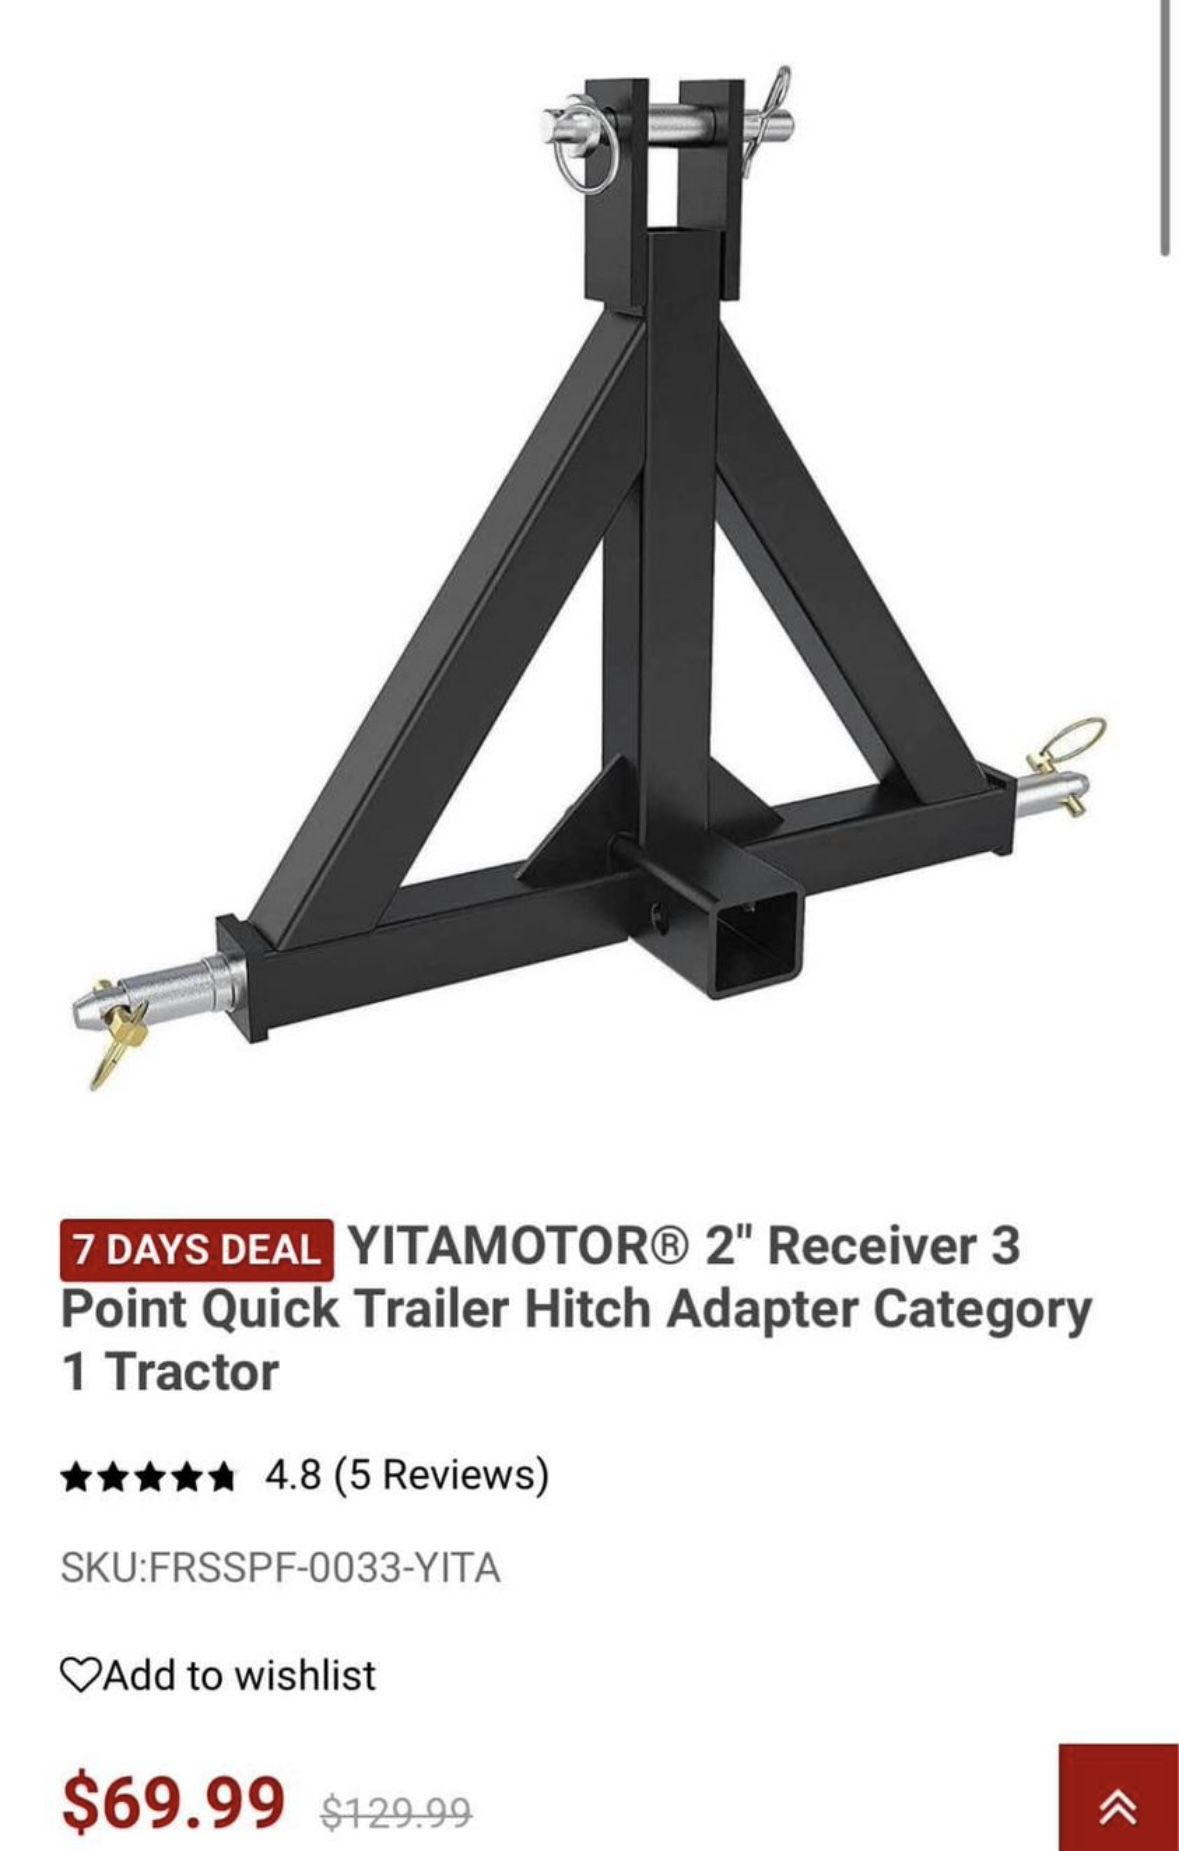 YITAMOTOR® 2" Receiver 3 Point Quick Trailer Hitch Adapter Category 1 Tractor